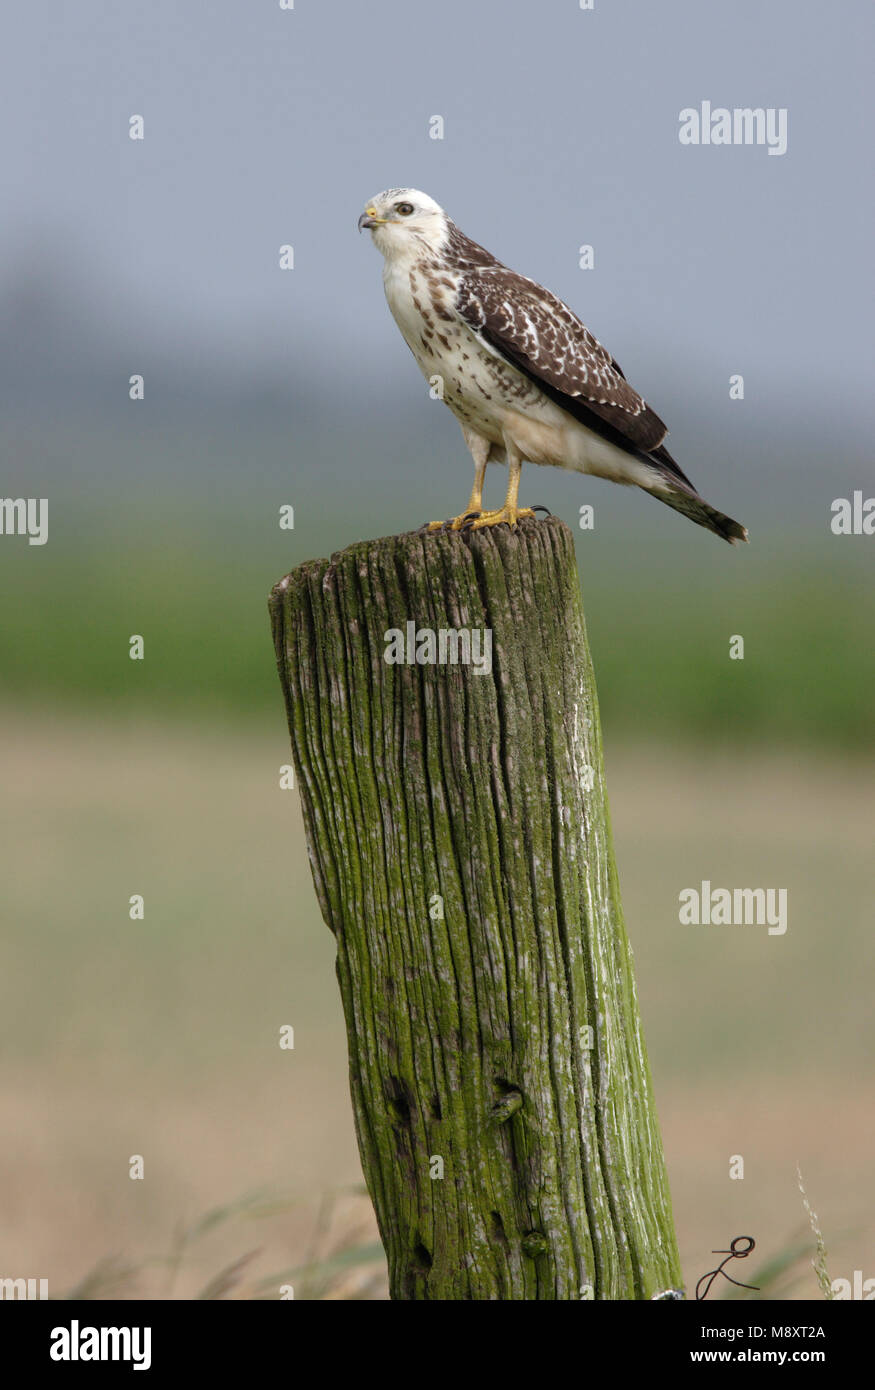 Buizerd ziitend op een paal; Common Buzzard perched on a pole Stock Photo